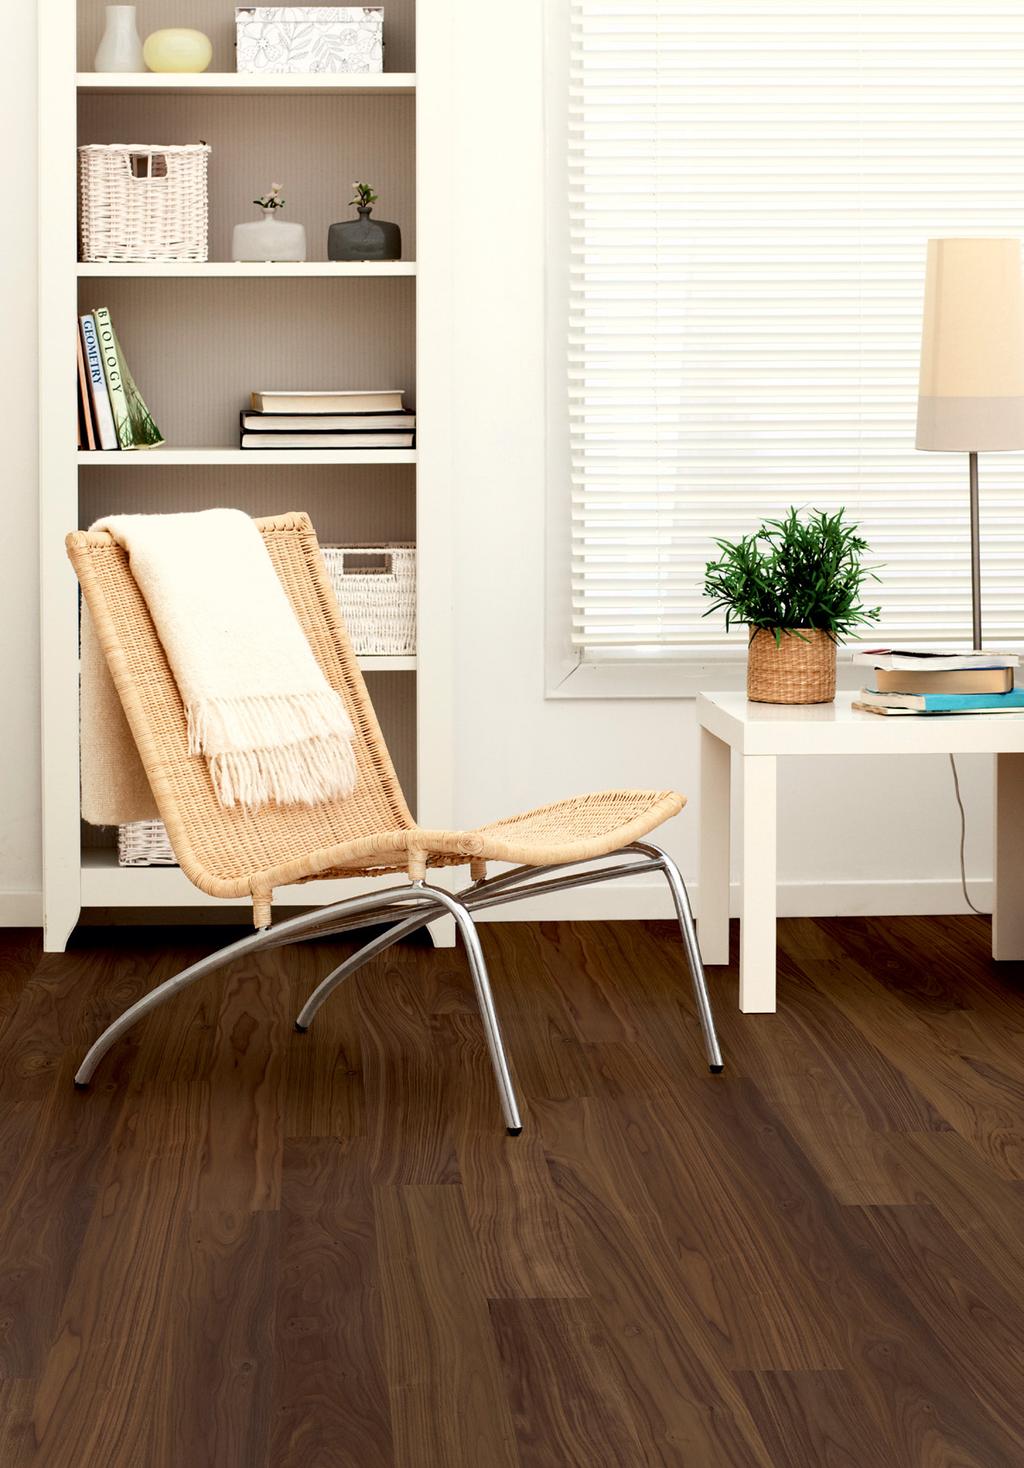 COMFORT TABIS PLANK This plank combines brushed surfaces